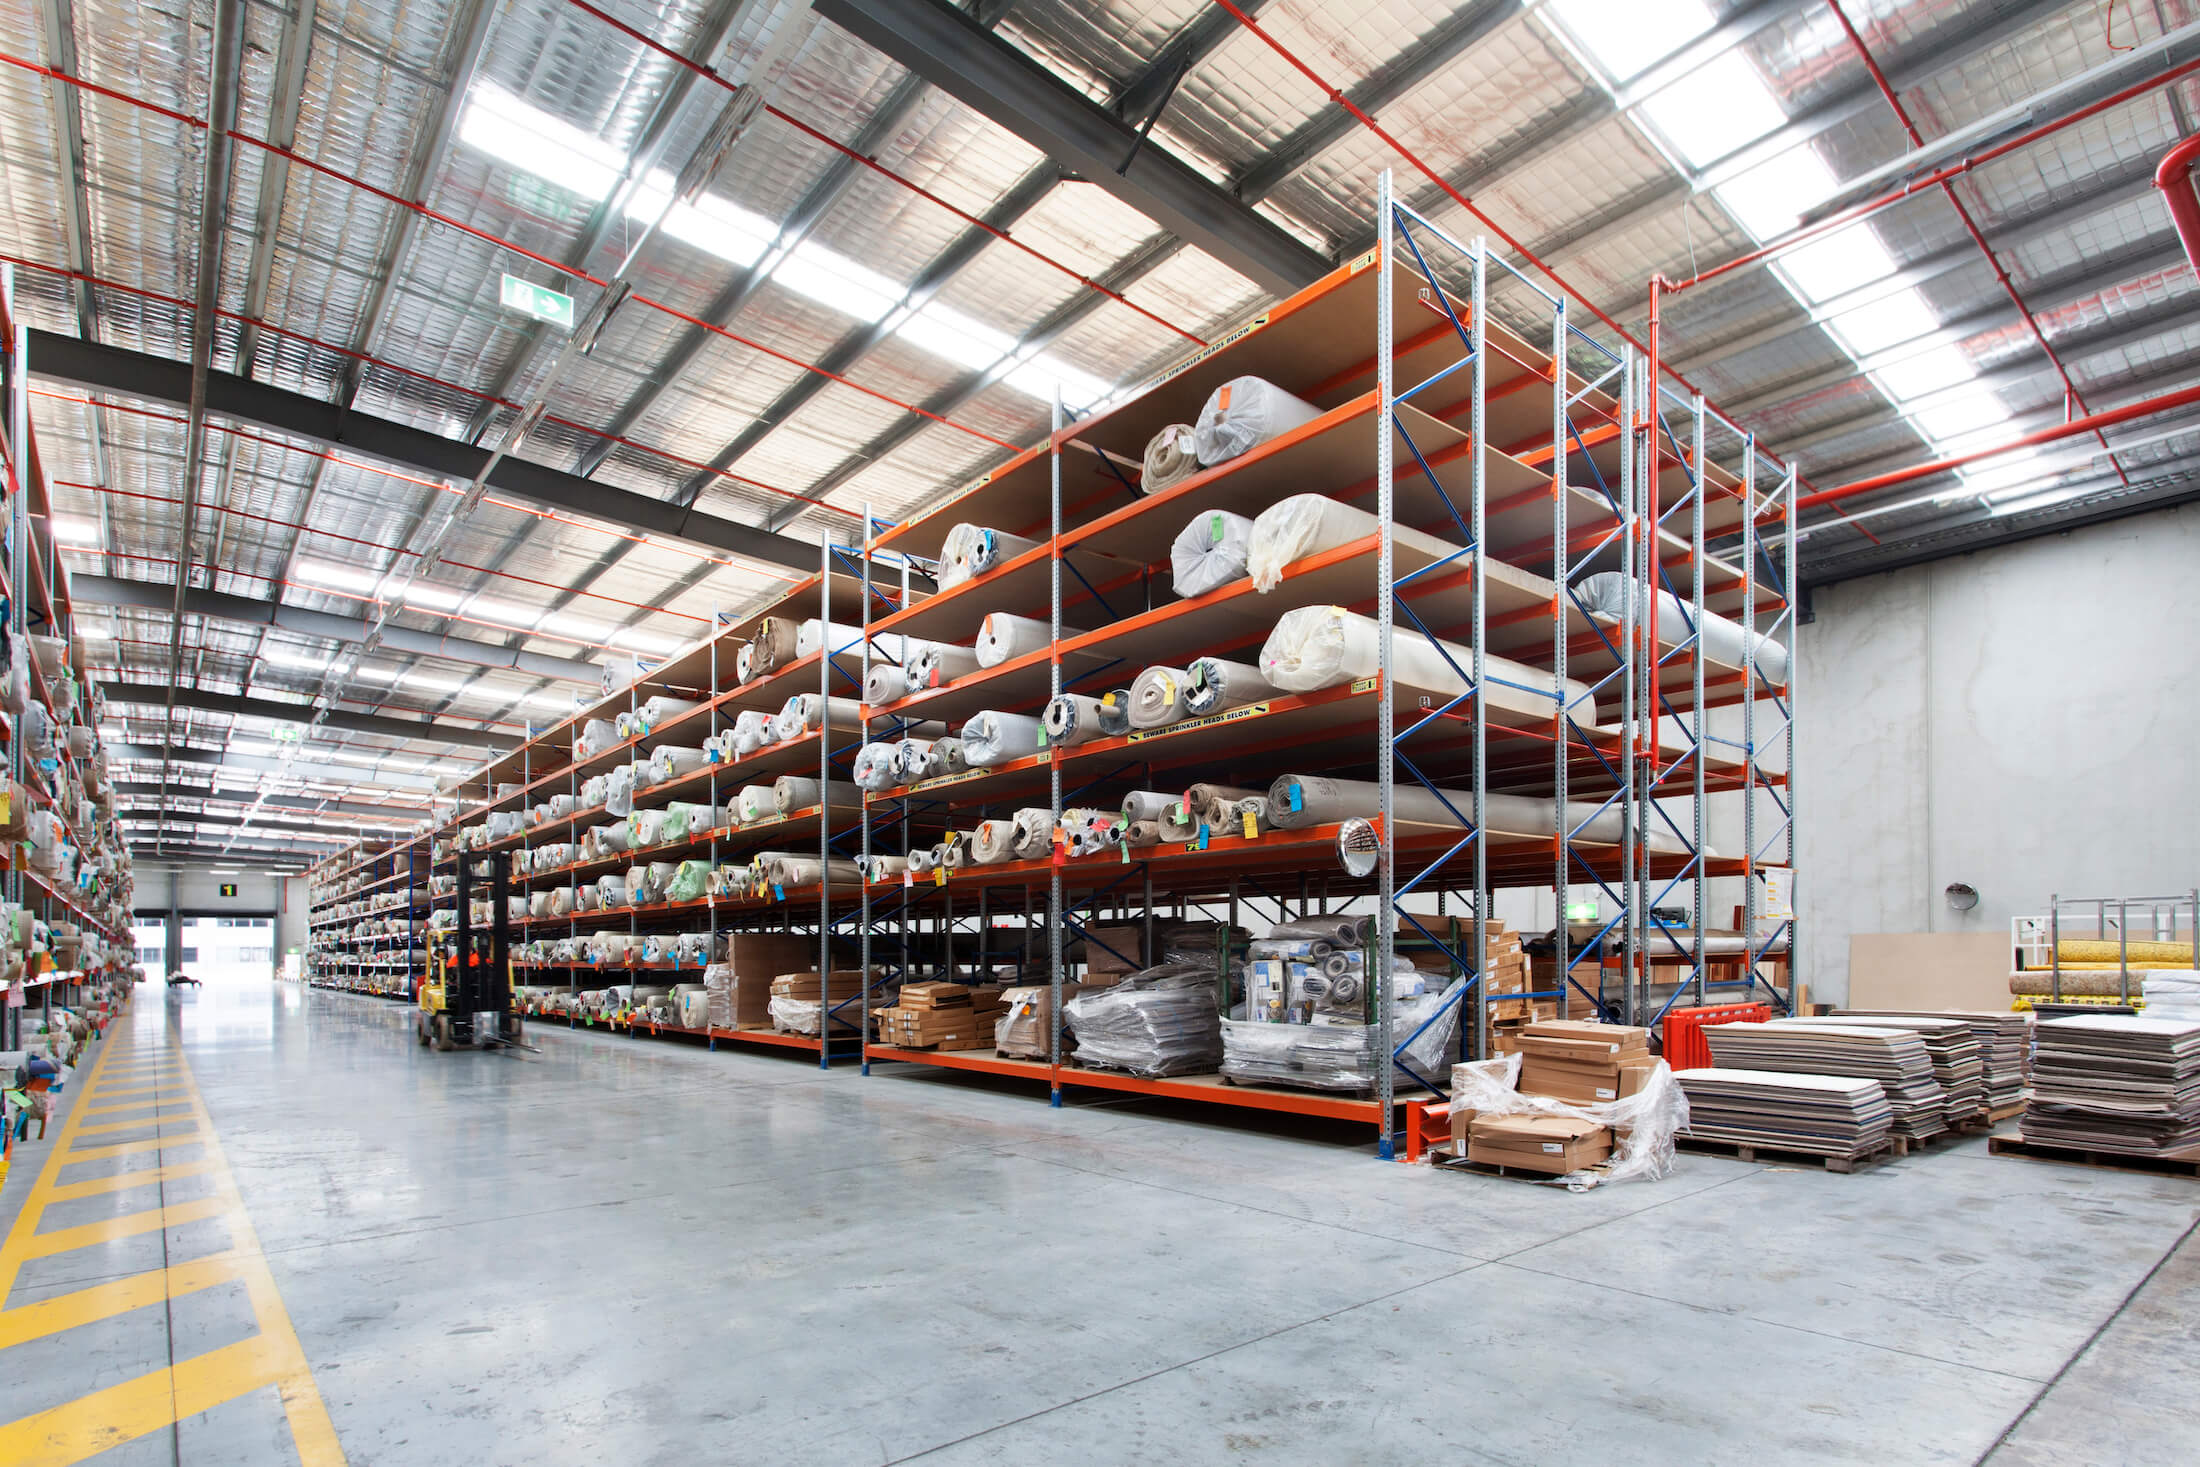 Carpet rolls on large shelving units in warehouse